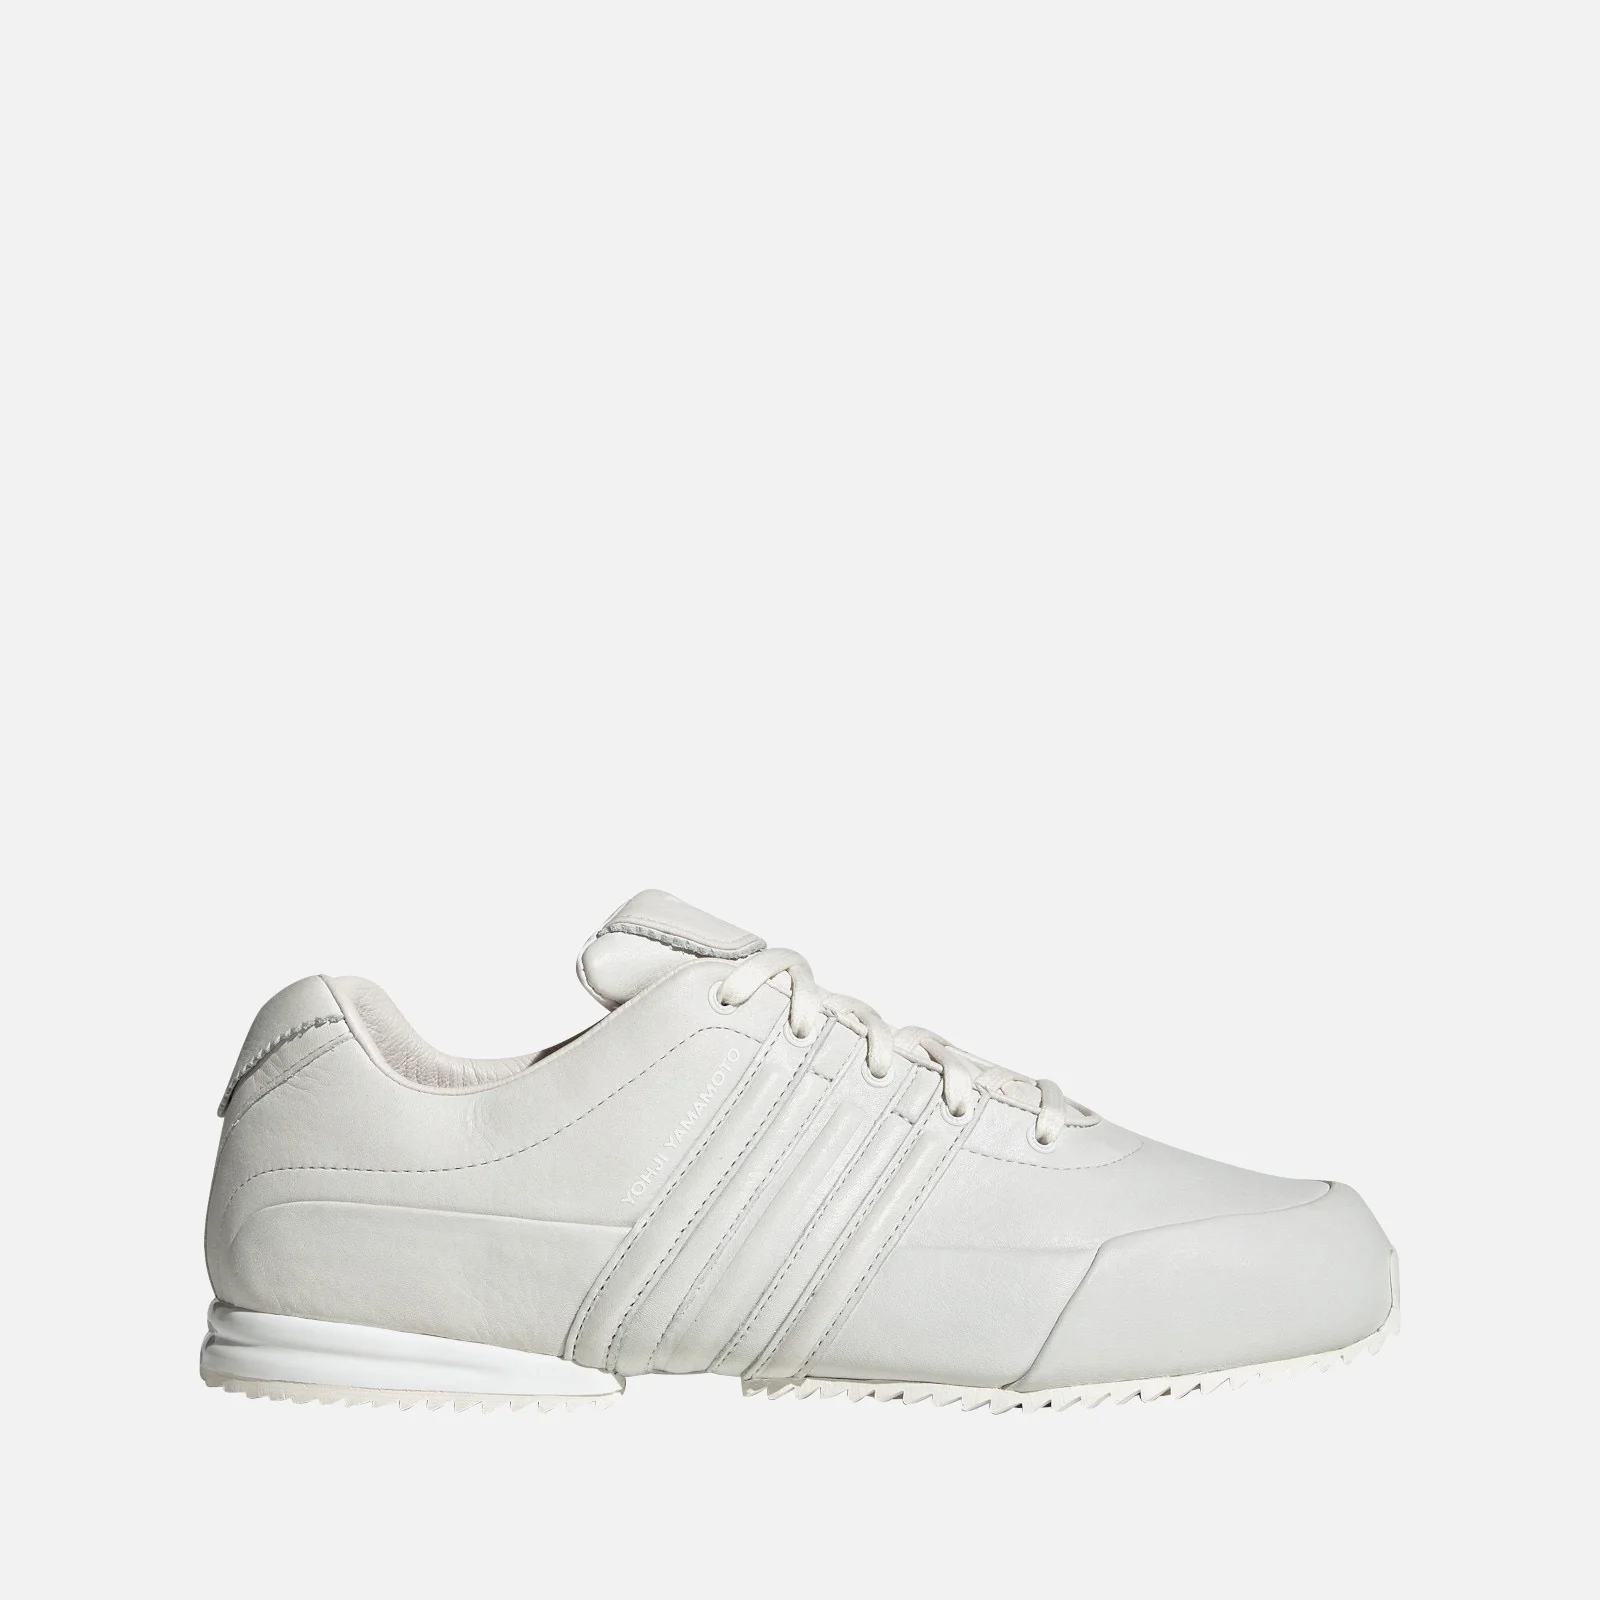 Y-3 Men's Sprint Trainers - Nondyed/Nondyed/Core White Image 1